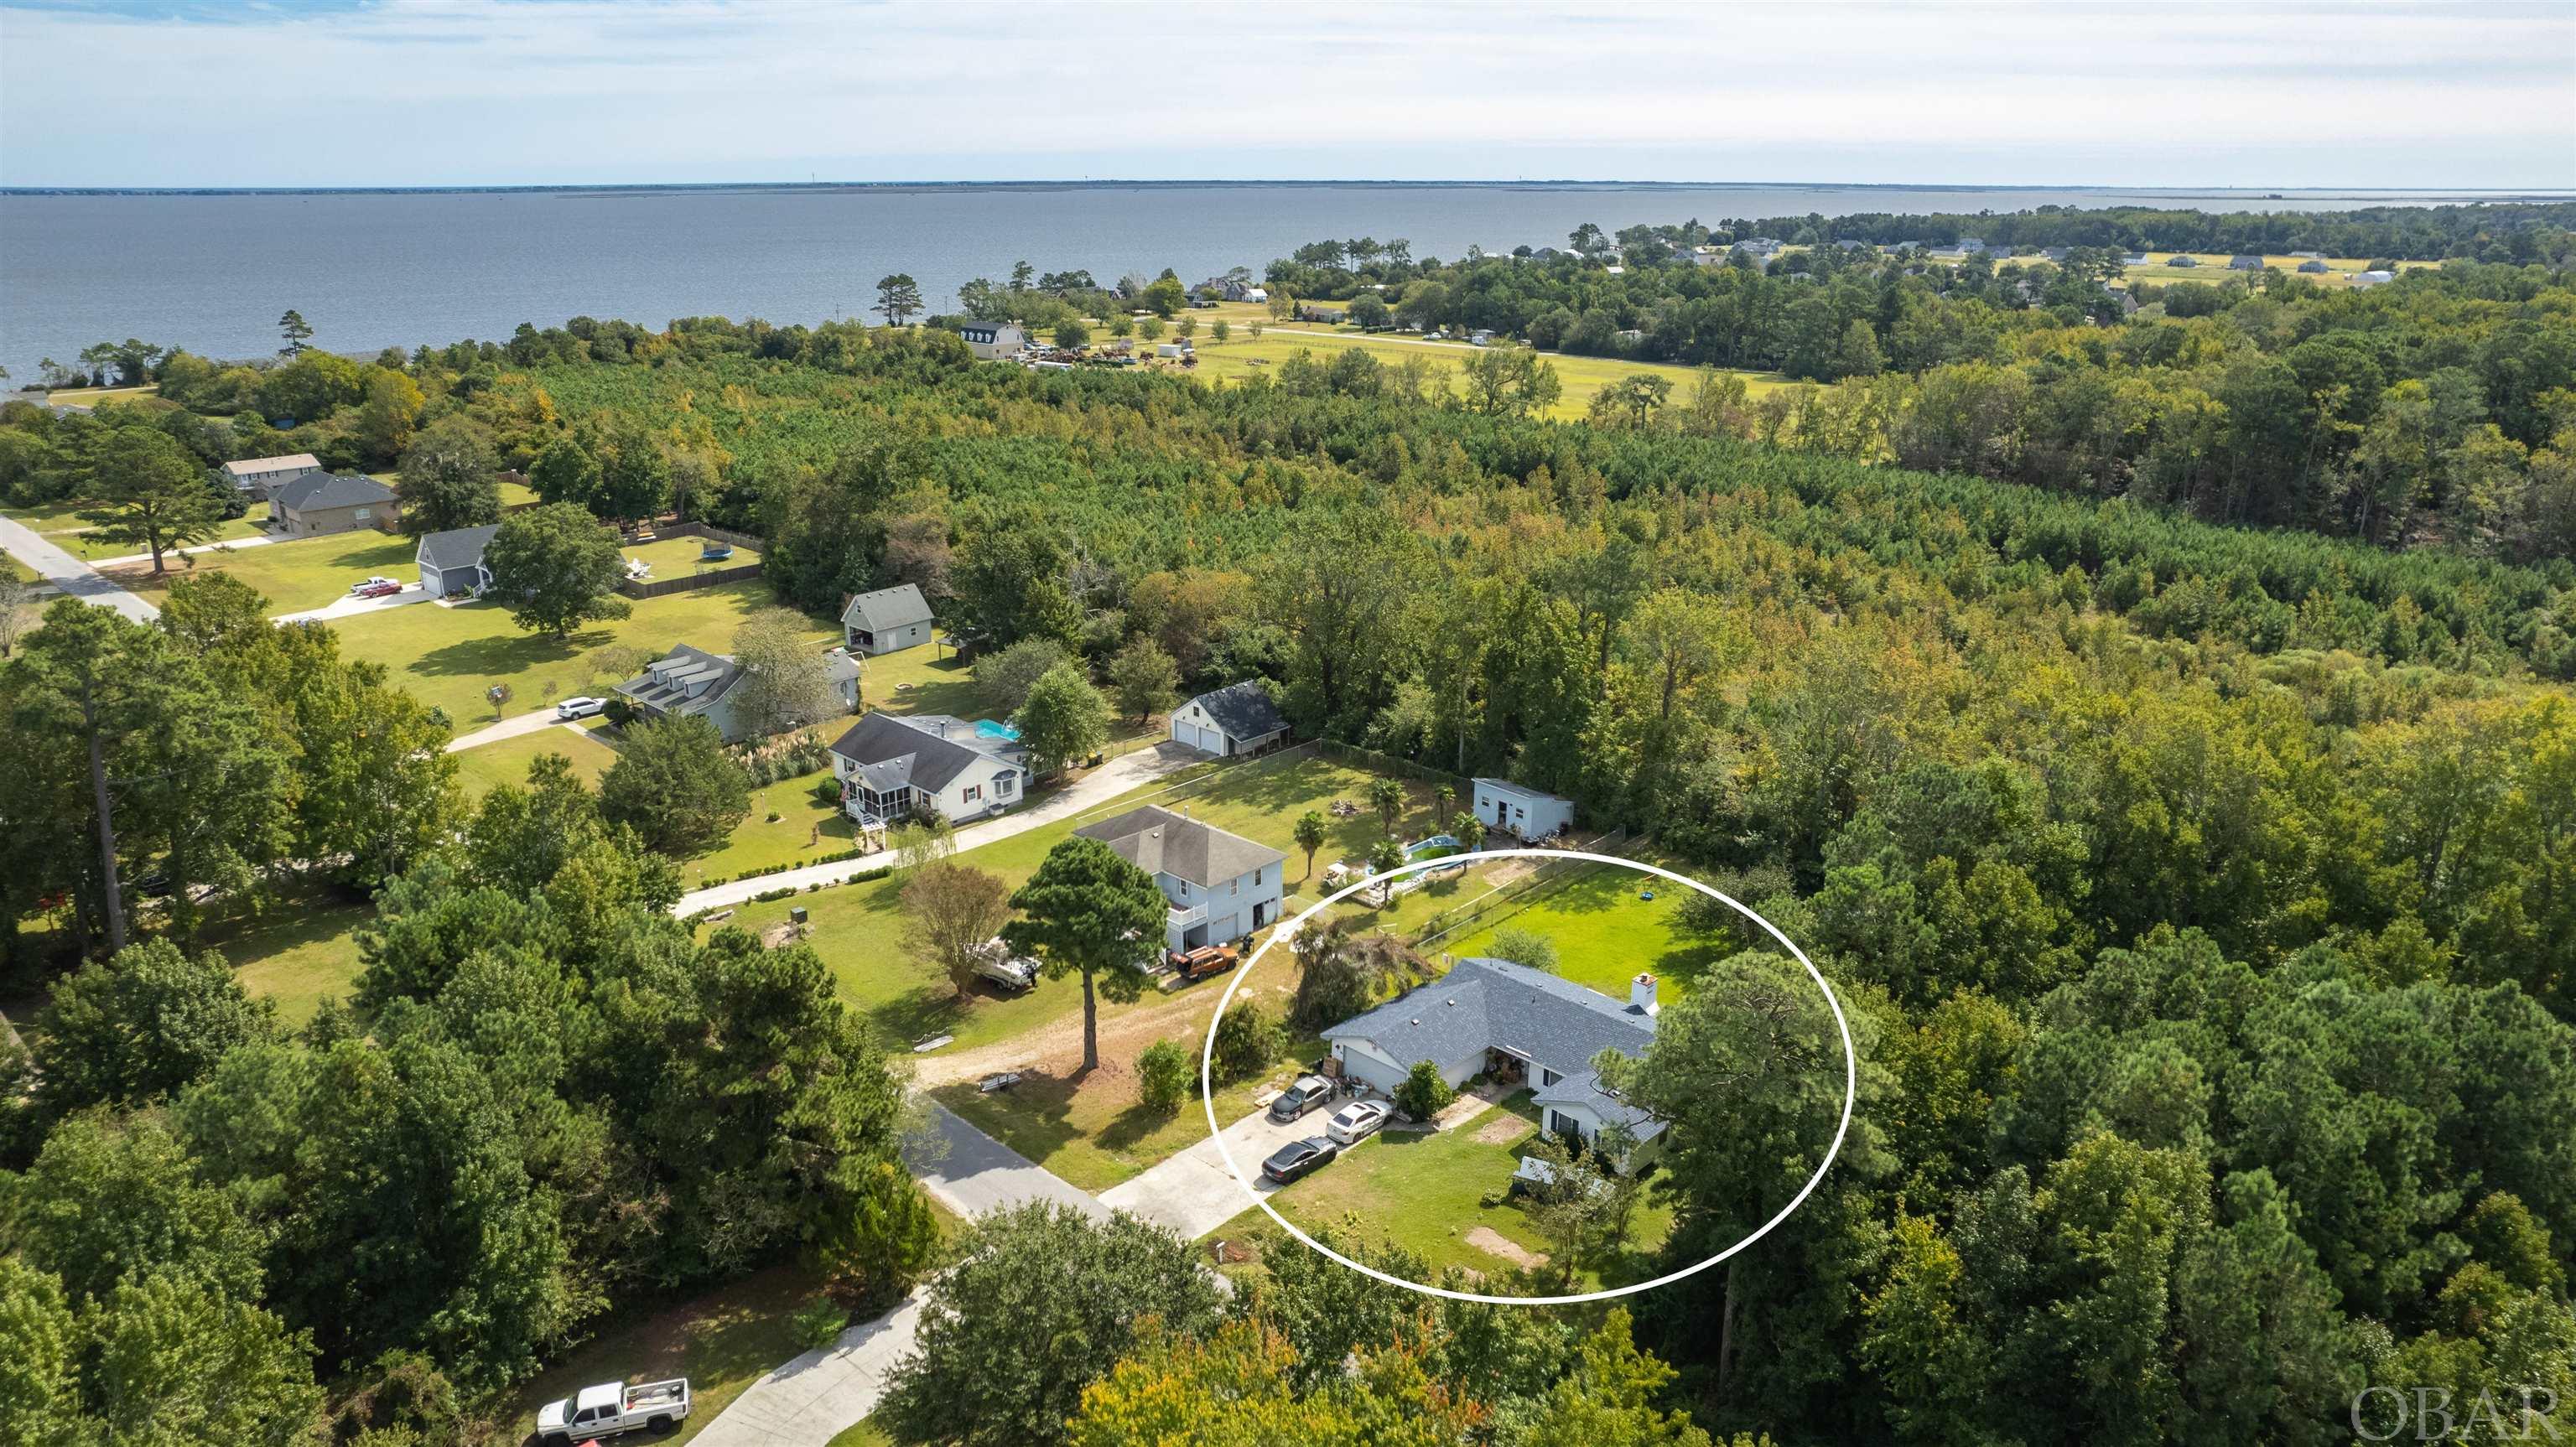 125 Lighthouse View, Aydlett, NC 27916, 3 Bedrooms Bedrooms, ,2 BathroomsBathrooms,Residential,For Sale,Lighthouse View,120487